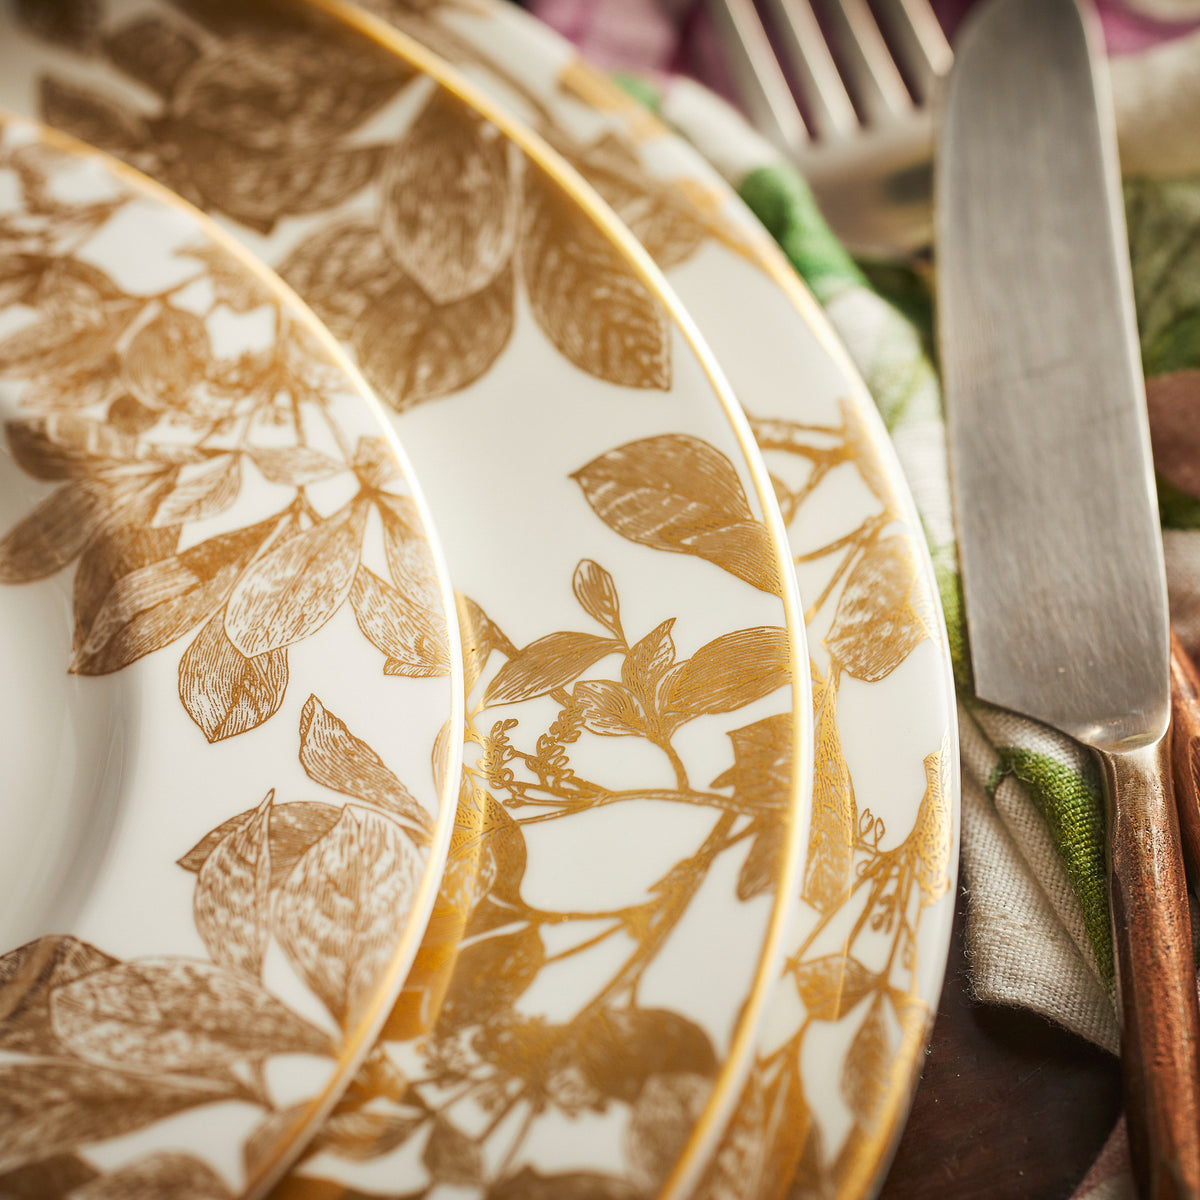 A set of Arbor Rimmed Salad Plate Gold from Caskata Artisanal Home and utensils on a table.